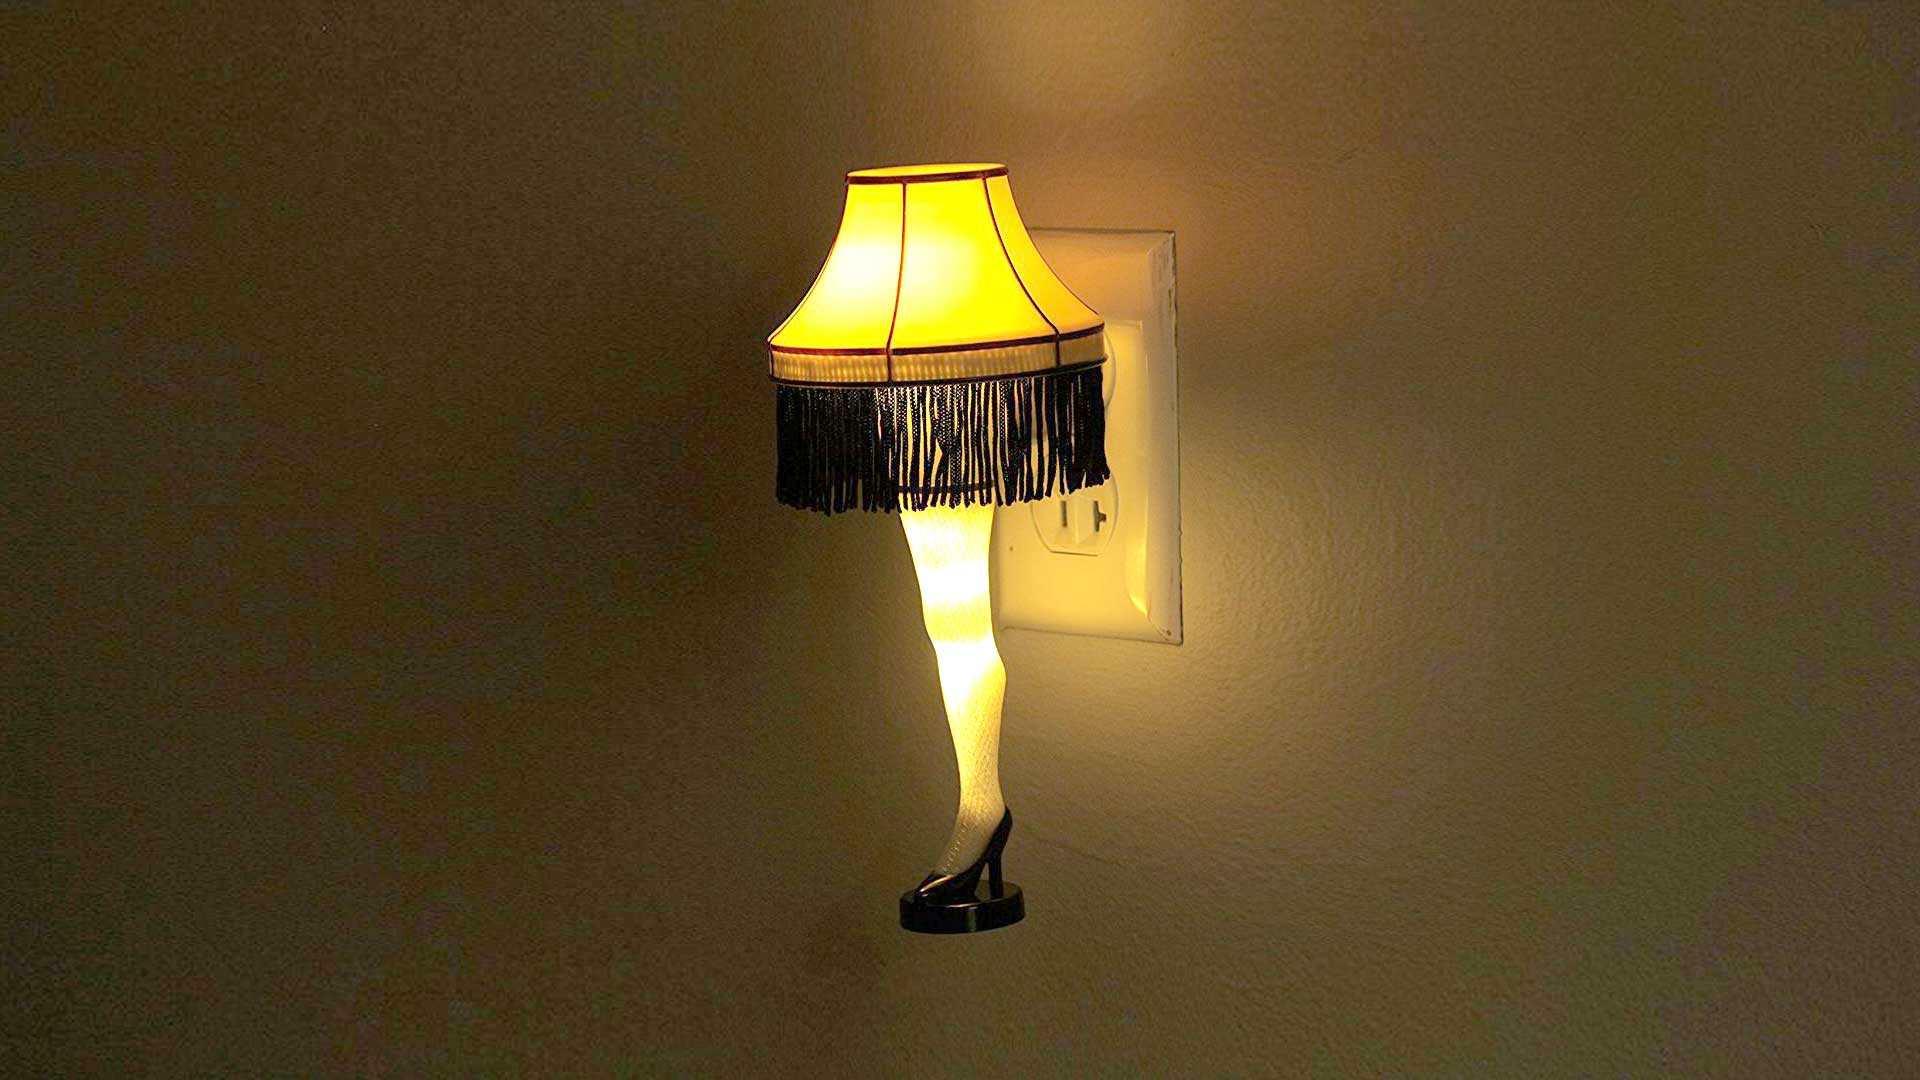 Christmas Story Leg Lamp Nightlight
 Leg Lamp The Ultimate Holiday Decoration from A